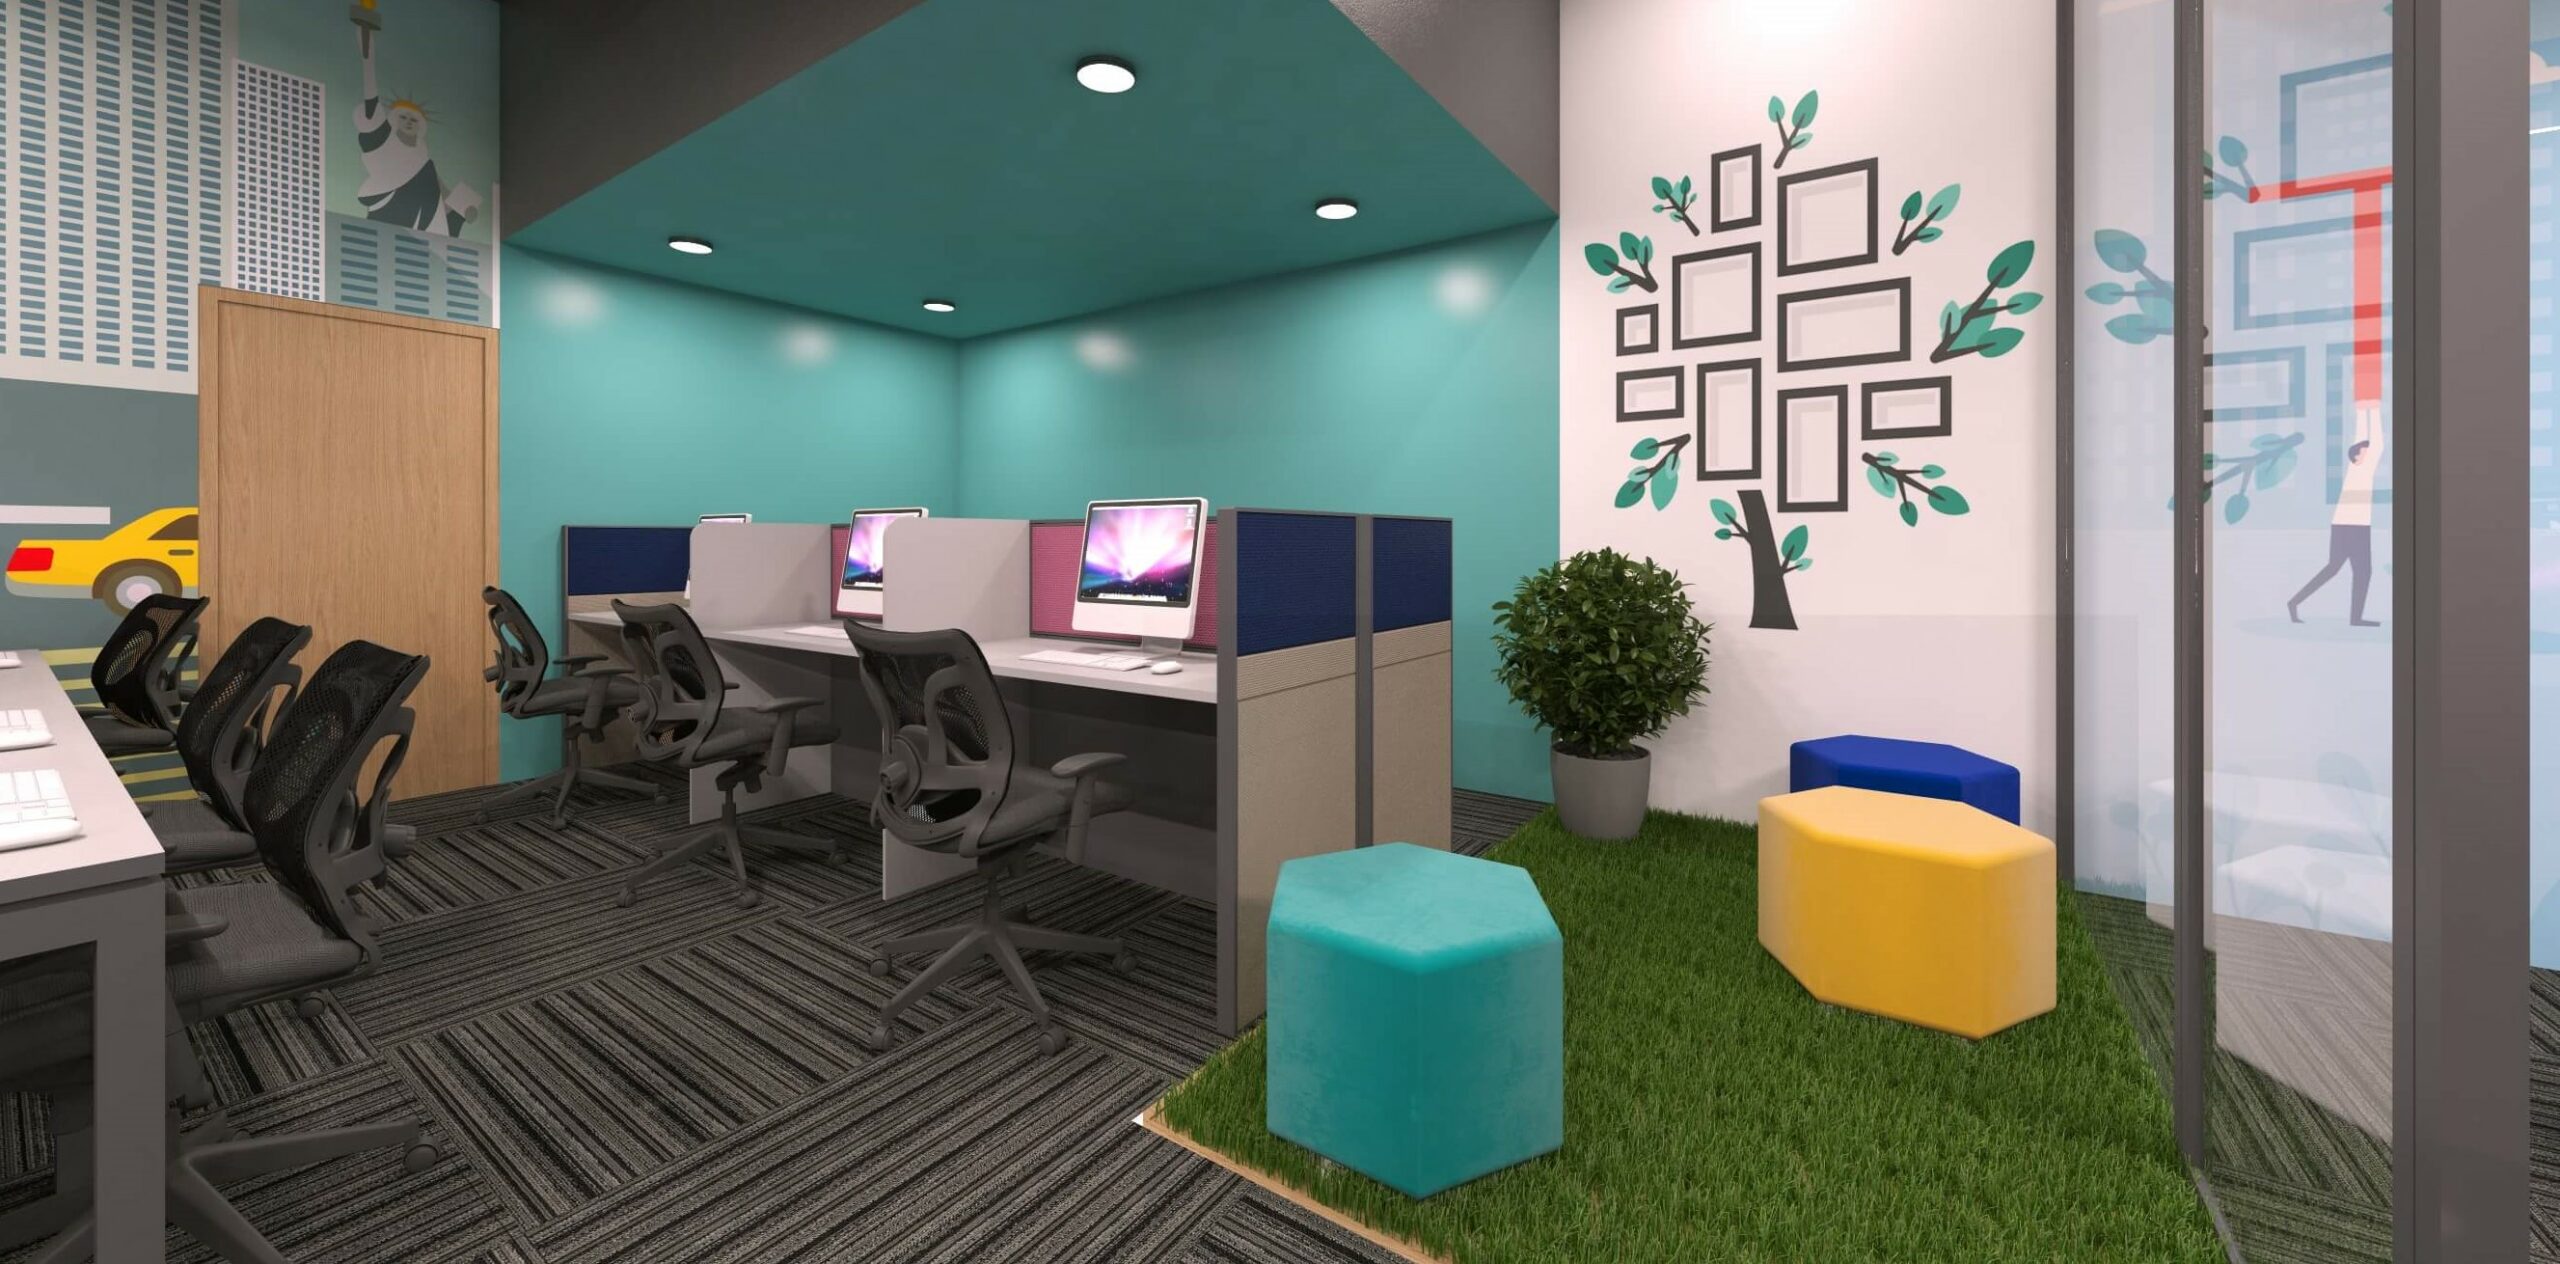 Top 10 Startup Office Design Ideas to Take Inspiration from - DevX